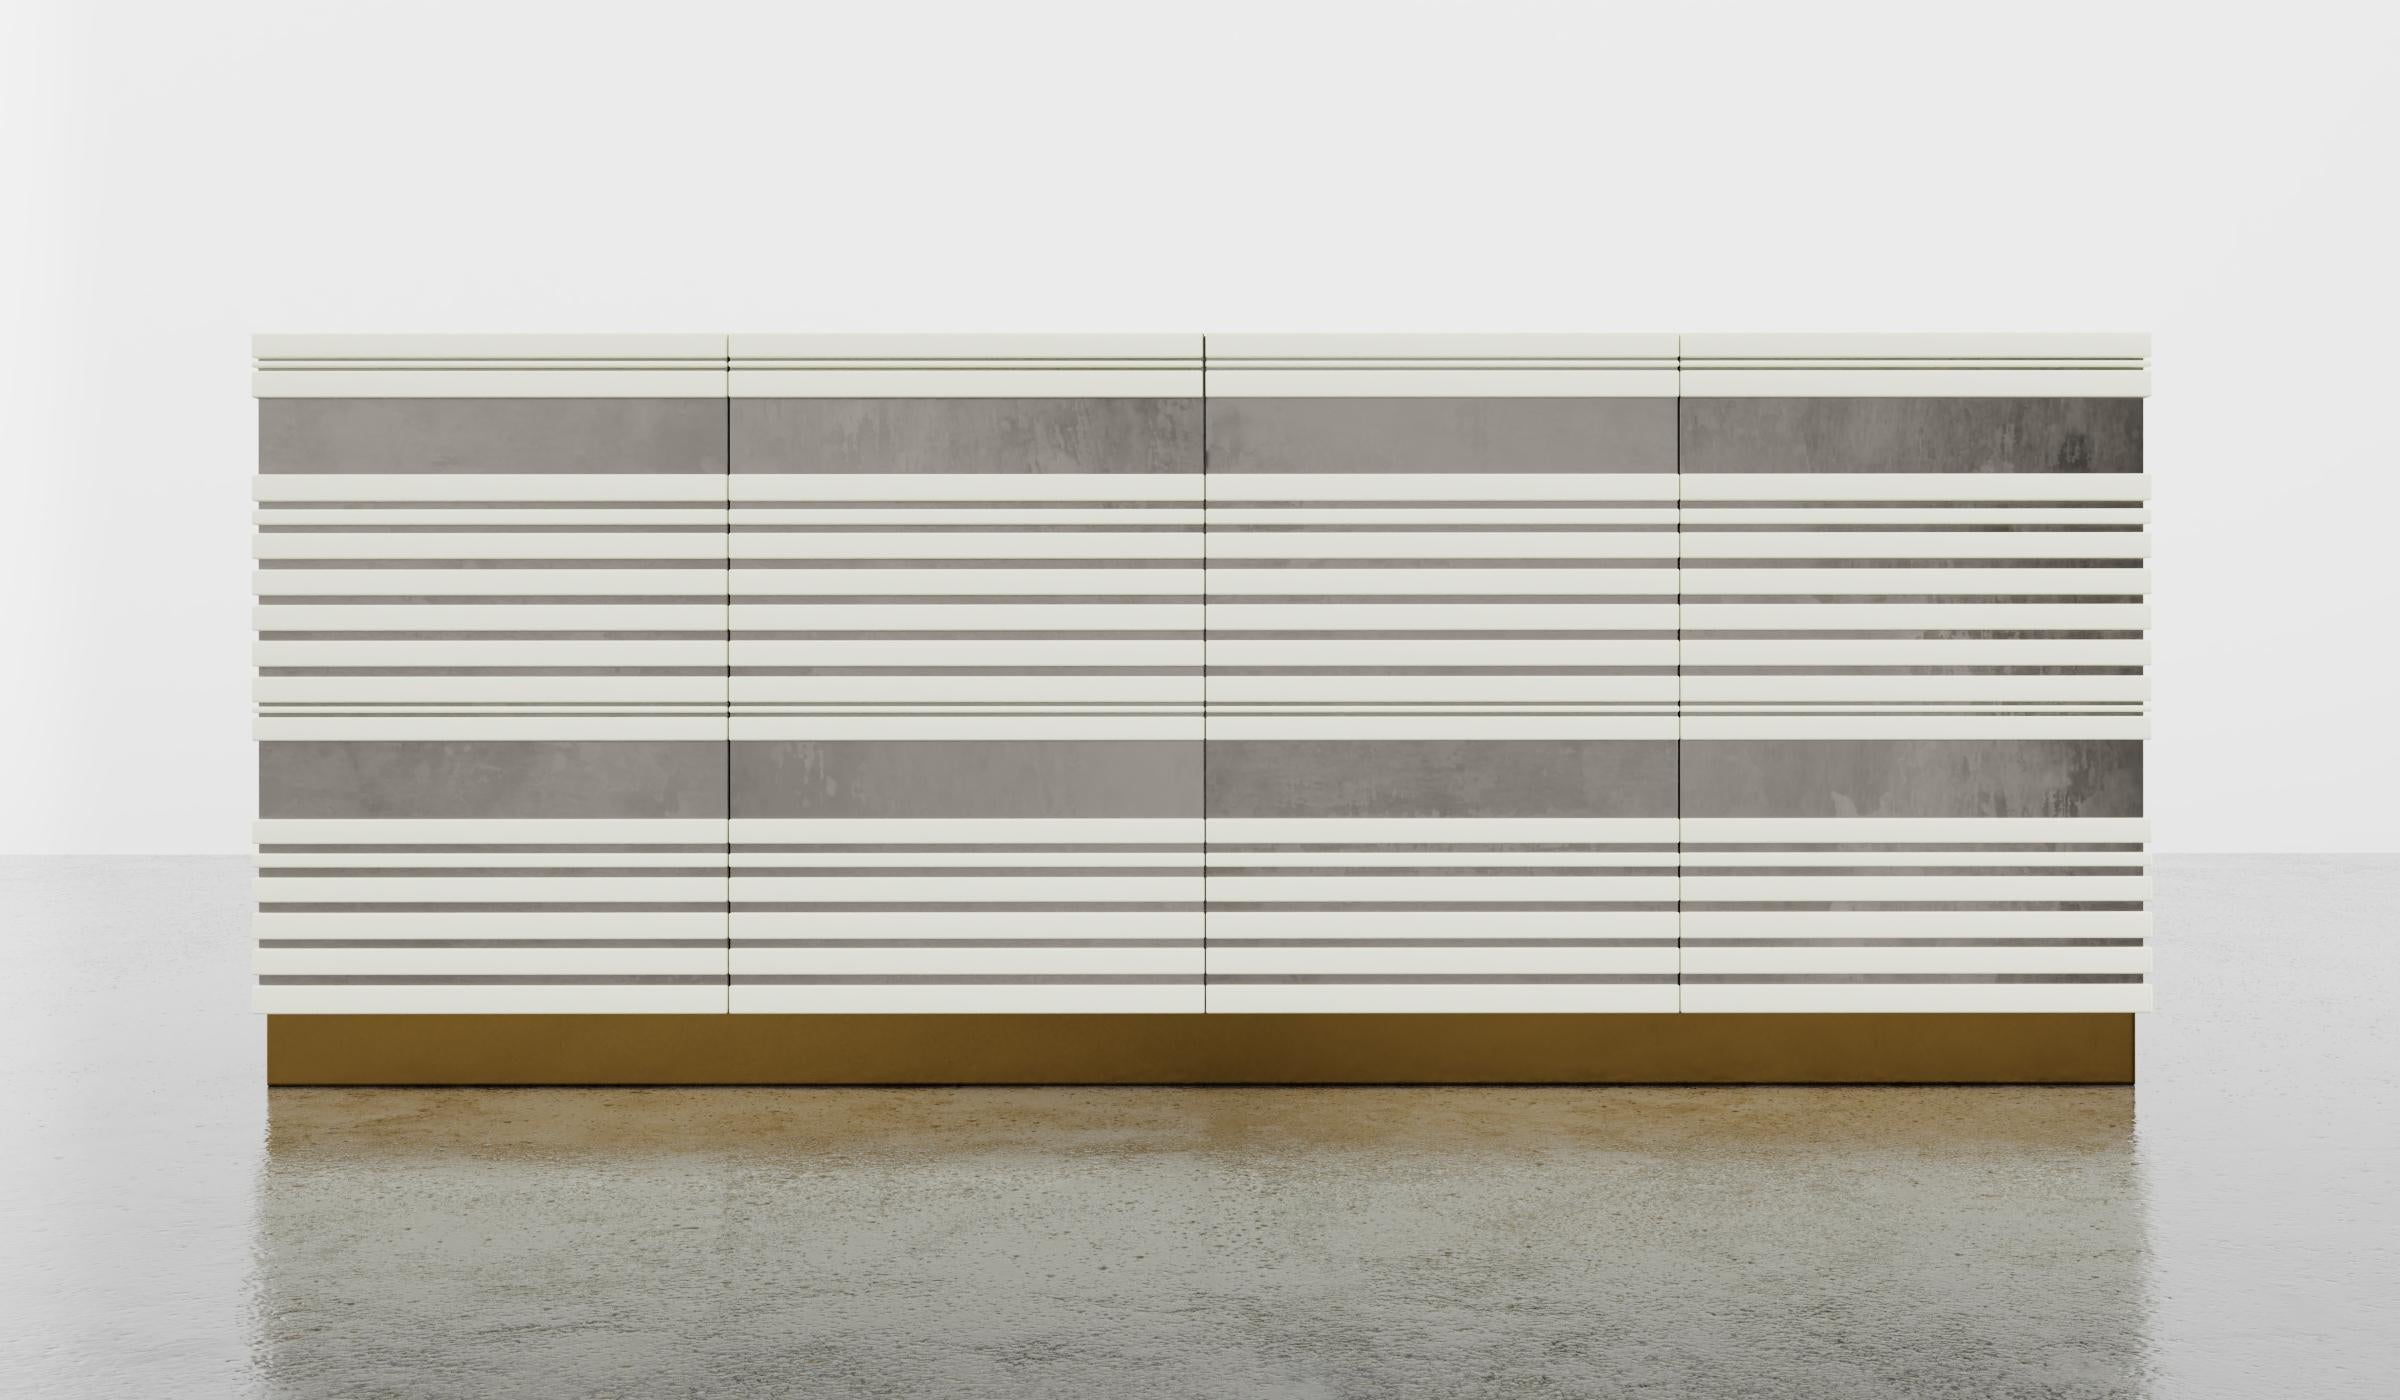 SABINE CREDENZA - Modern Linear Body and Silver Leafed Inlay with Metal Base

The Sabine Credenza is a beautiful and modern piece of furniture that features a linear lacquer body with a striking silver leaf inlay, set on a metal plinth. The standard